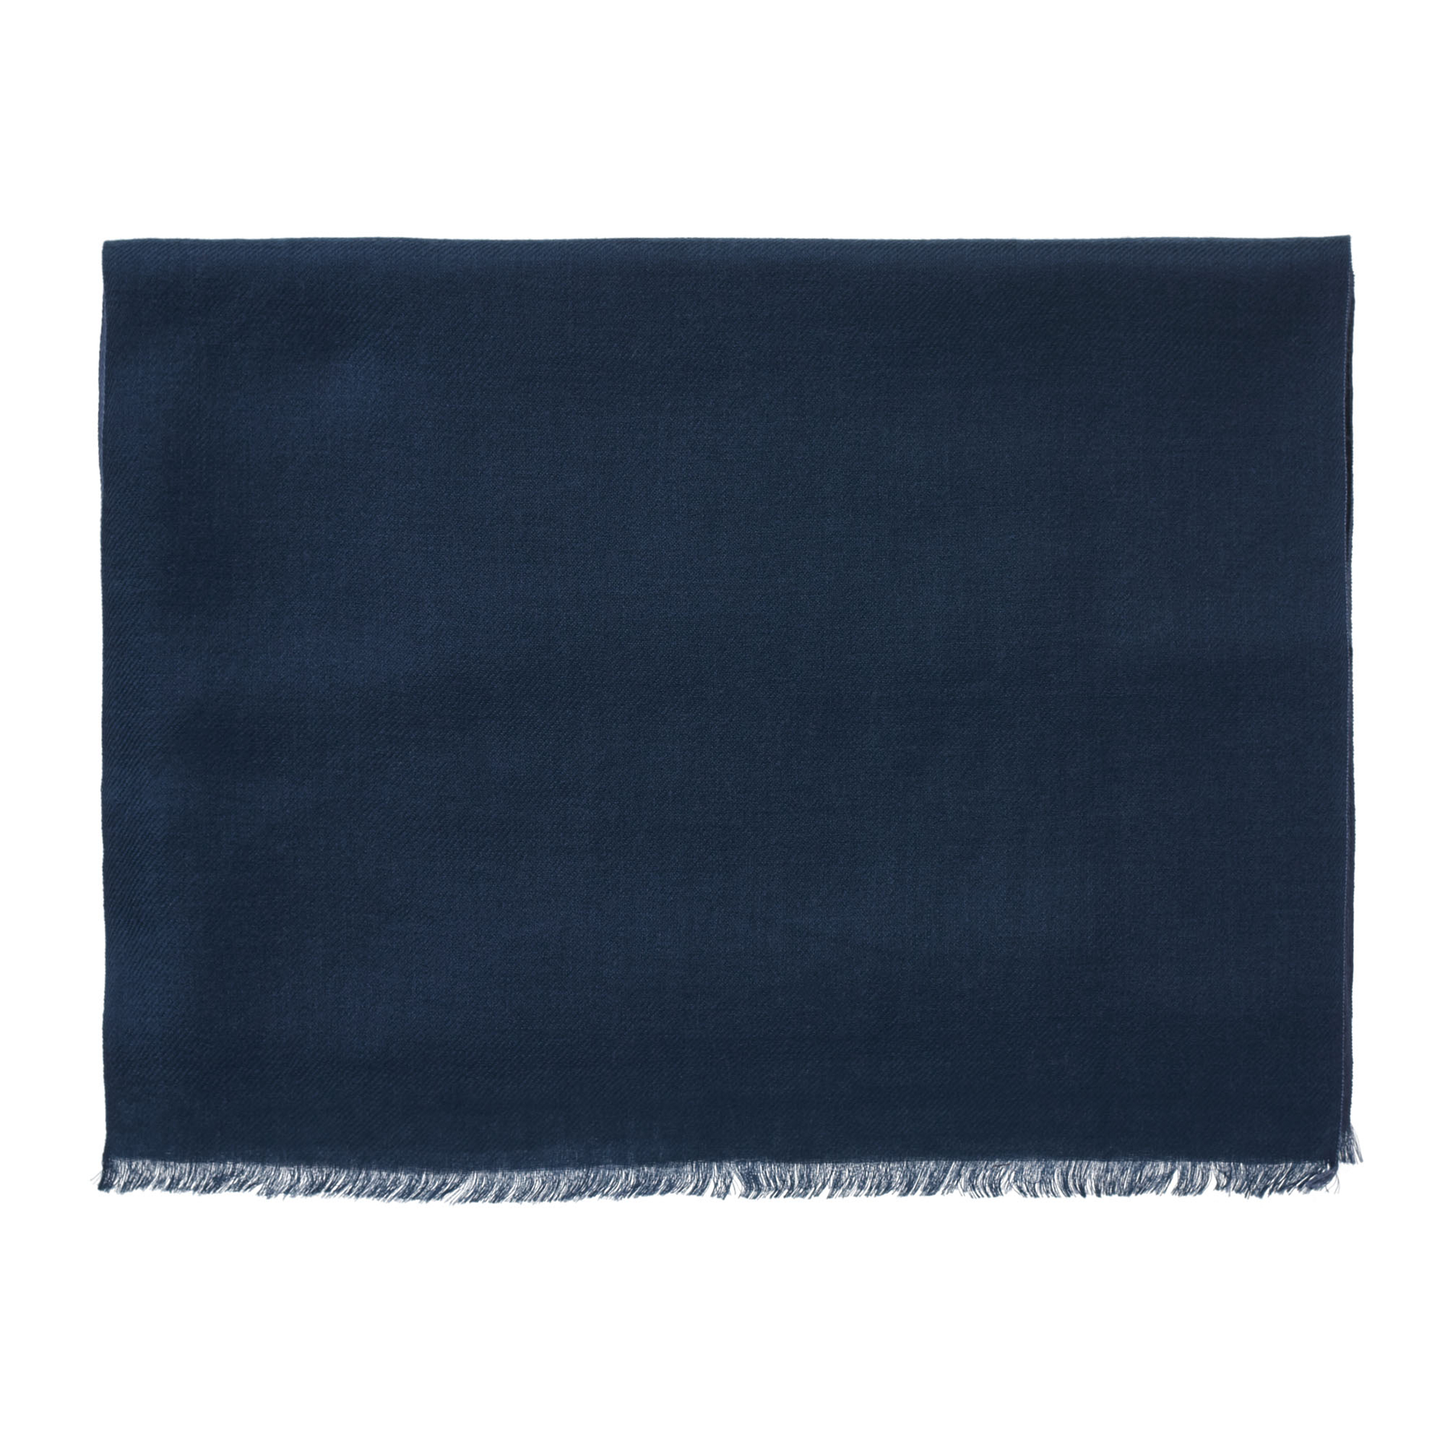 Loro Piana Reversible Fringed Cashmere and Silk-Blend Scarf in Blue - SARTALE